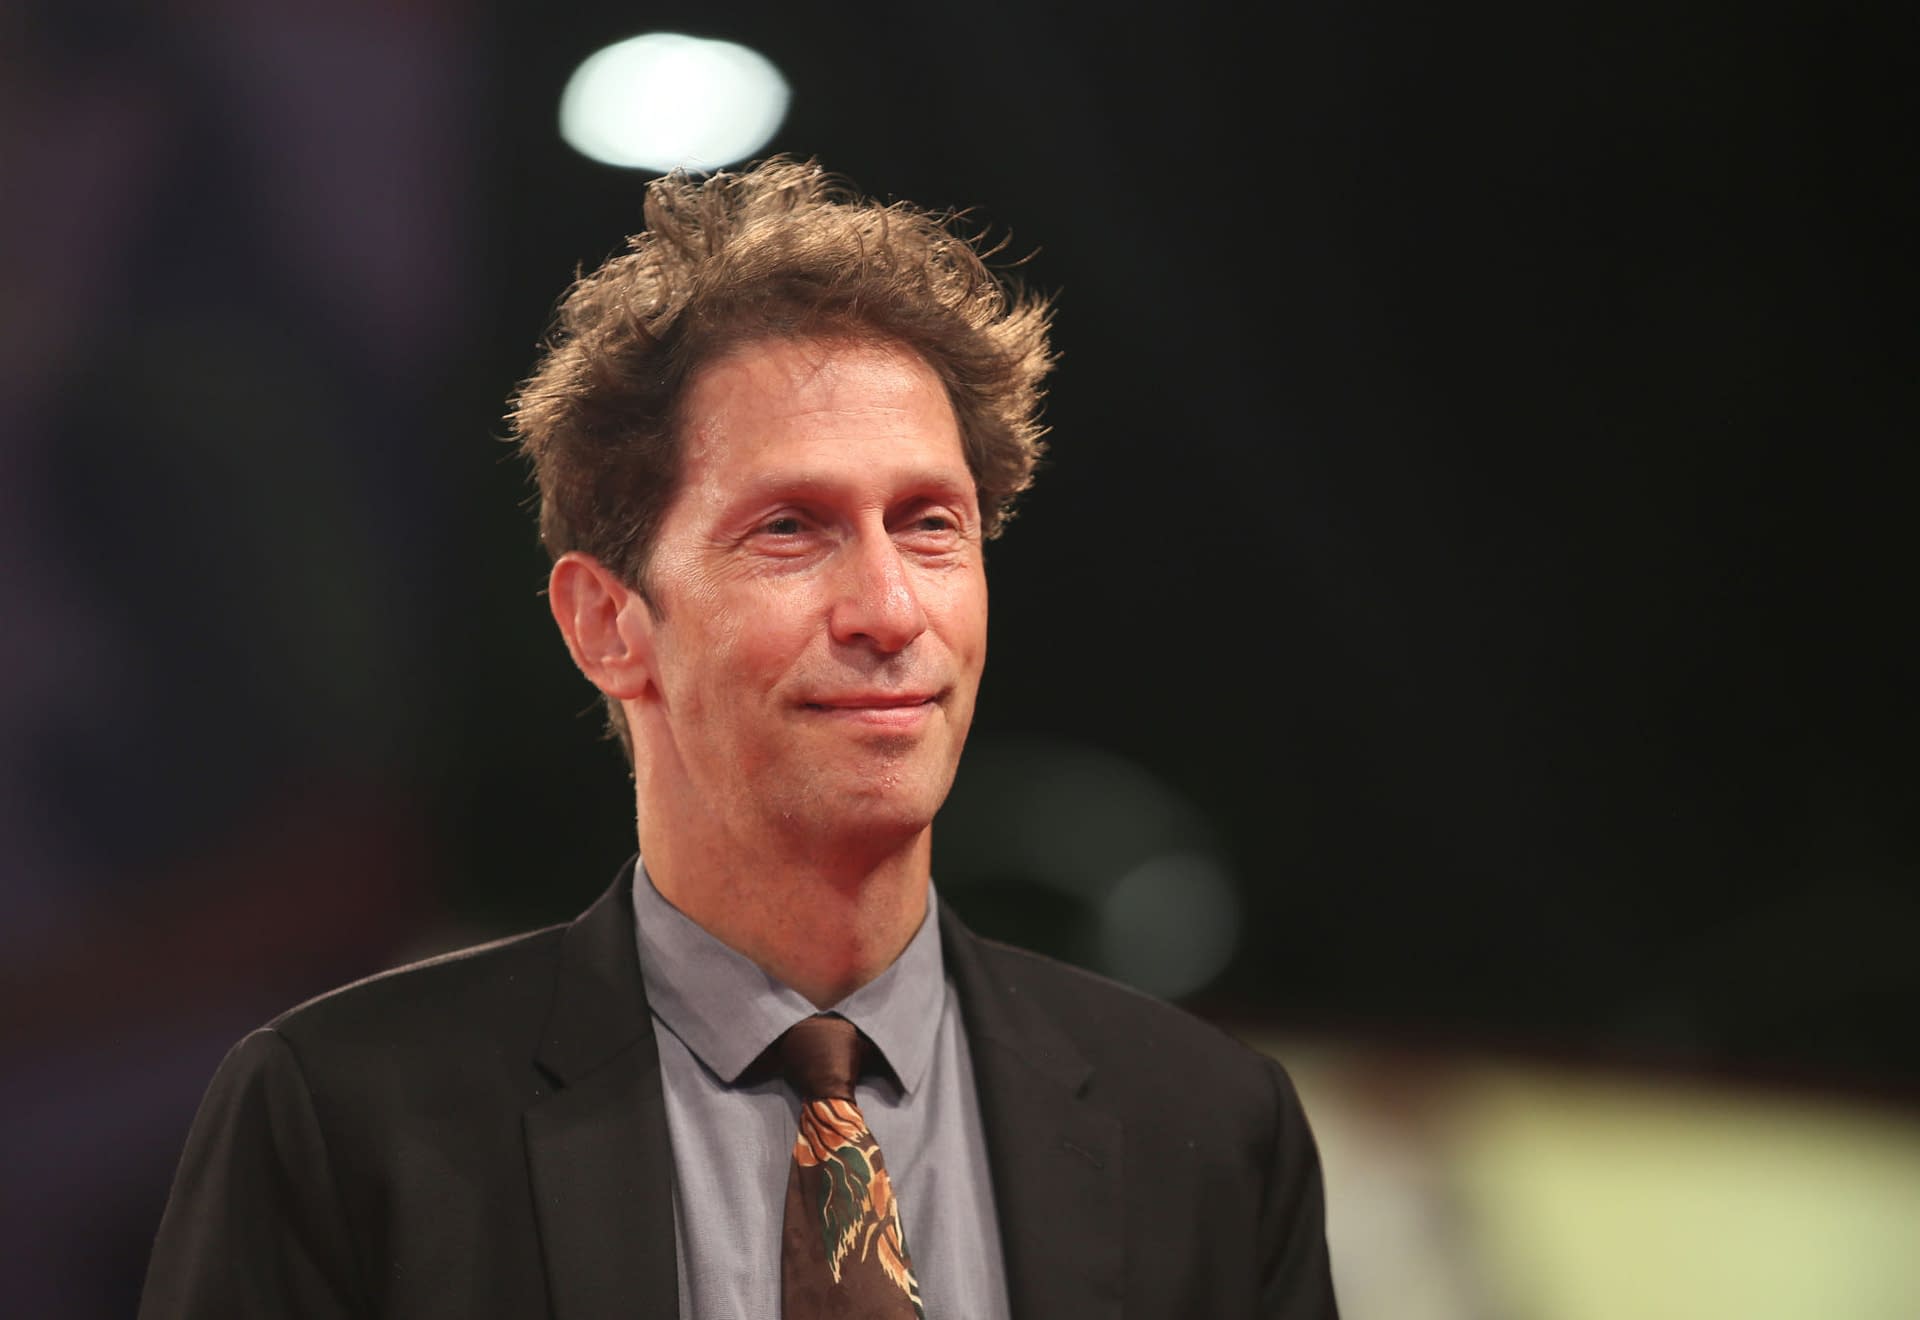 THE BALLAD OF BUSTER SCRUGGS Oscar ad with cast, Tim Blake Nelson